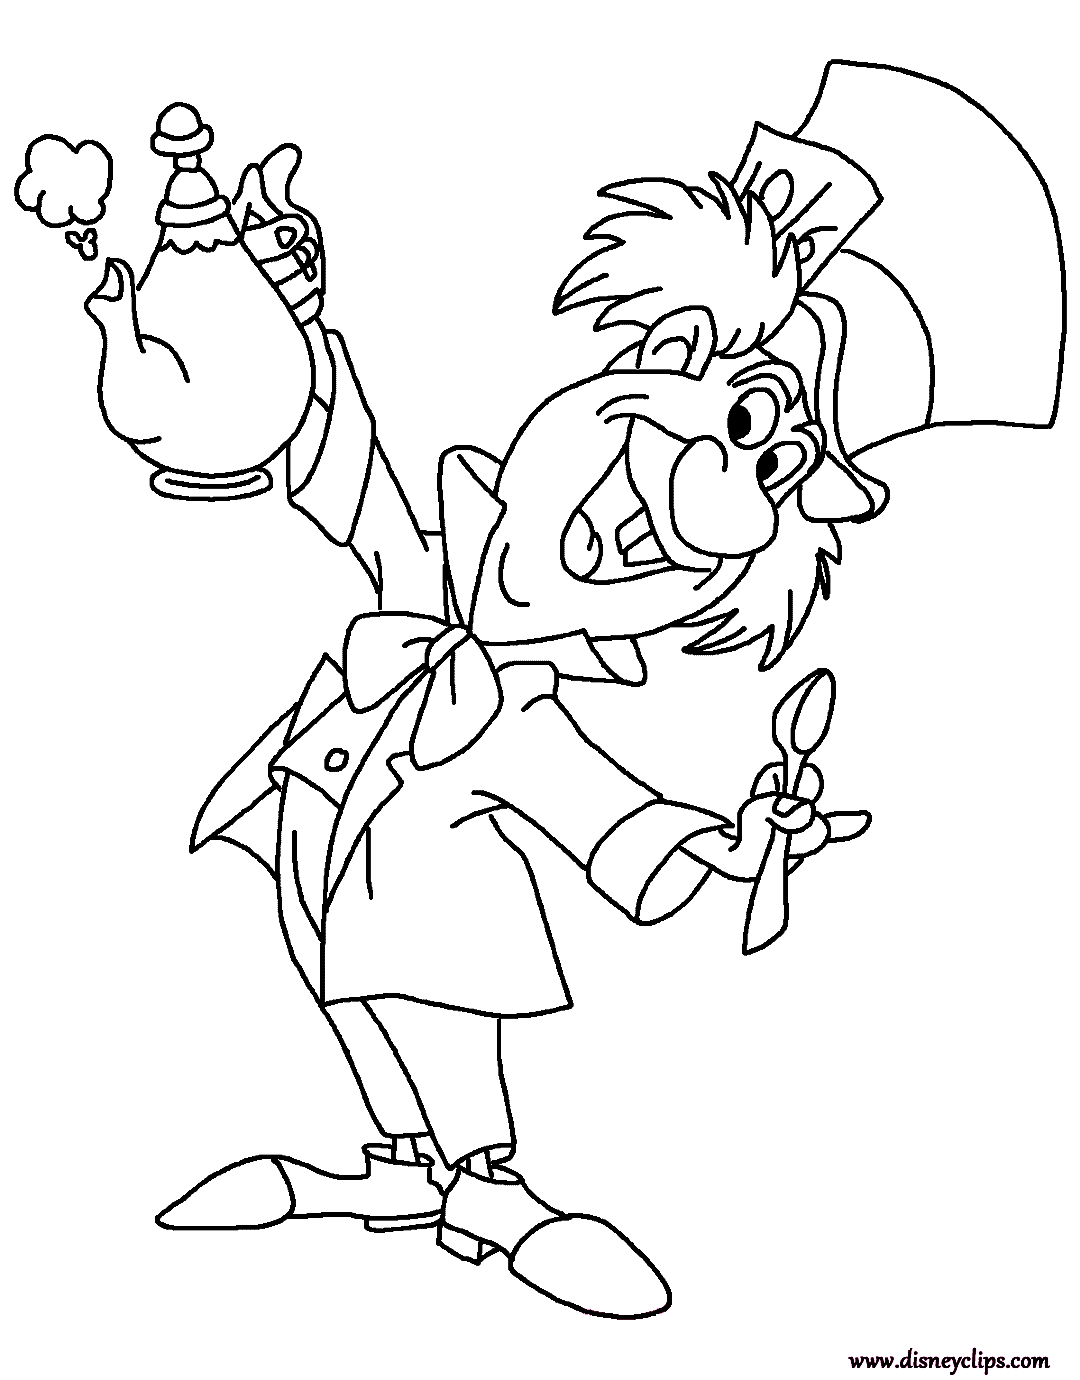 Mad Hatter Holding a Teapot Coloring Page